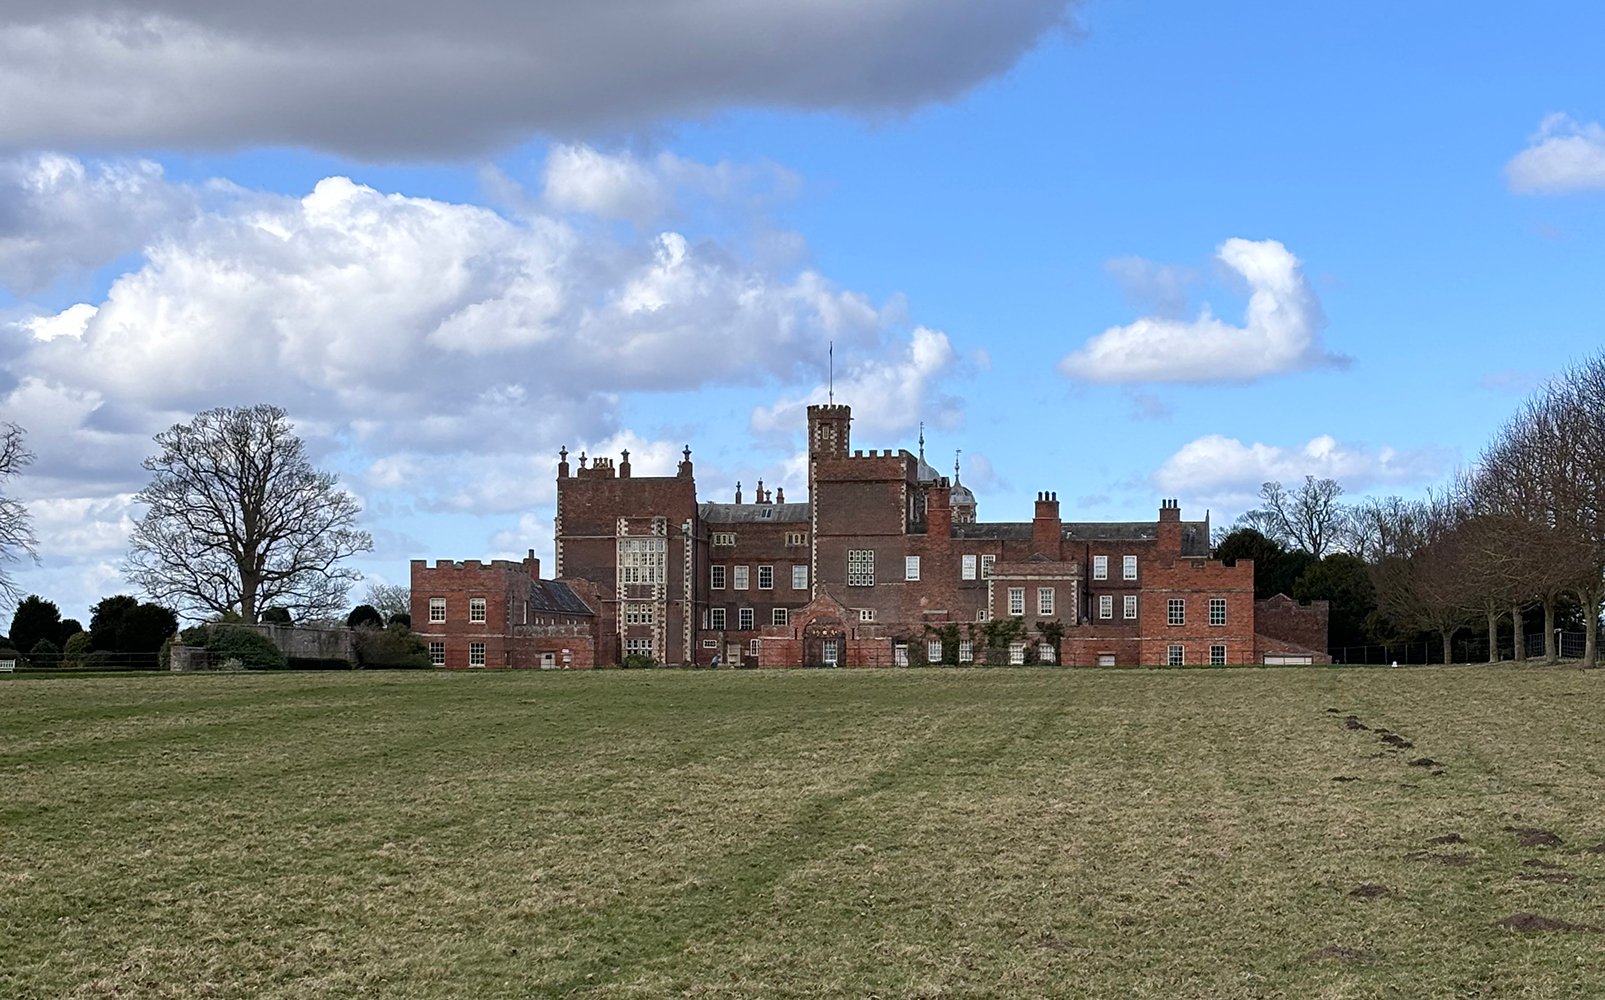 Image name burton constable hall red bricks blue sky and clouds east yorkshire the 18 image from the post A look at the history of Burton Constable Hall, with Dr Emma Wells in Yorkshire.com.